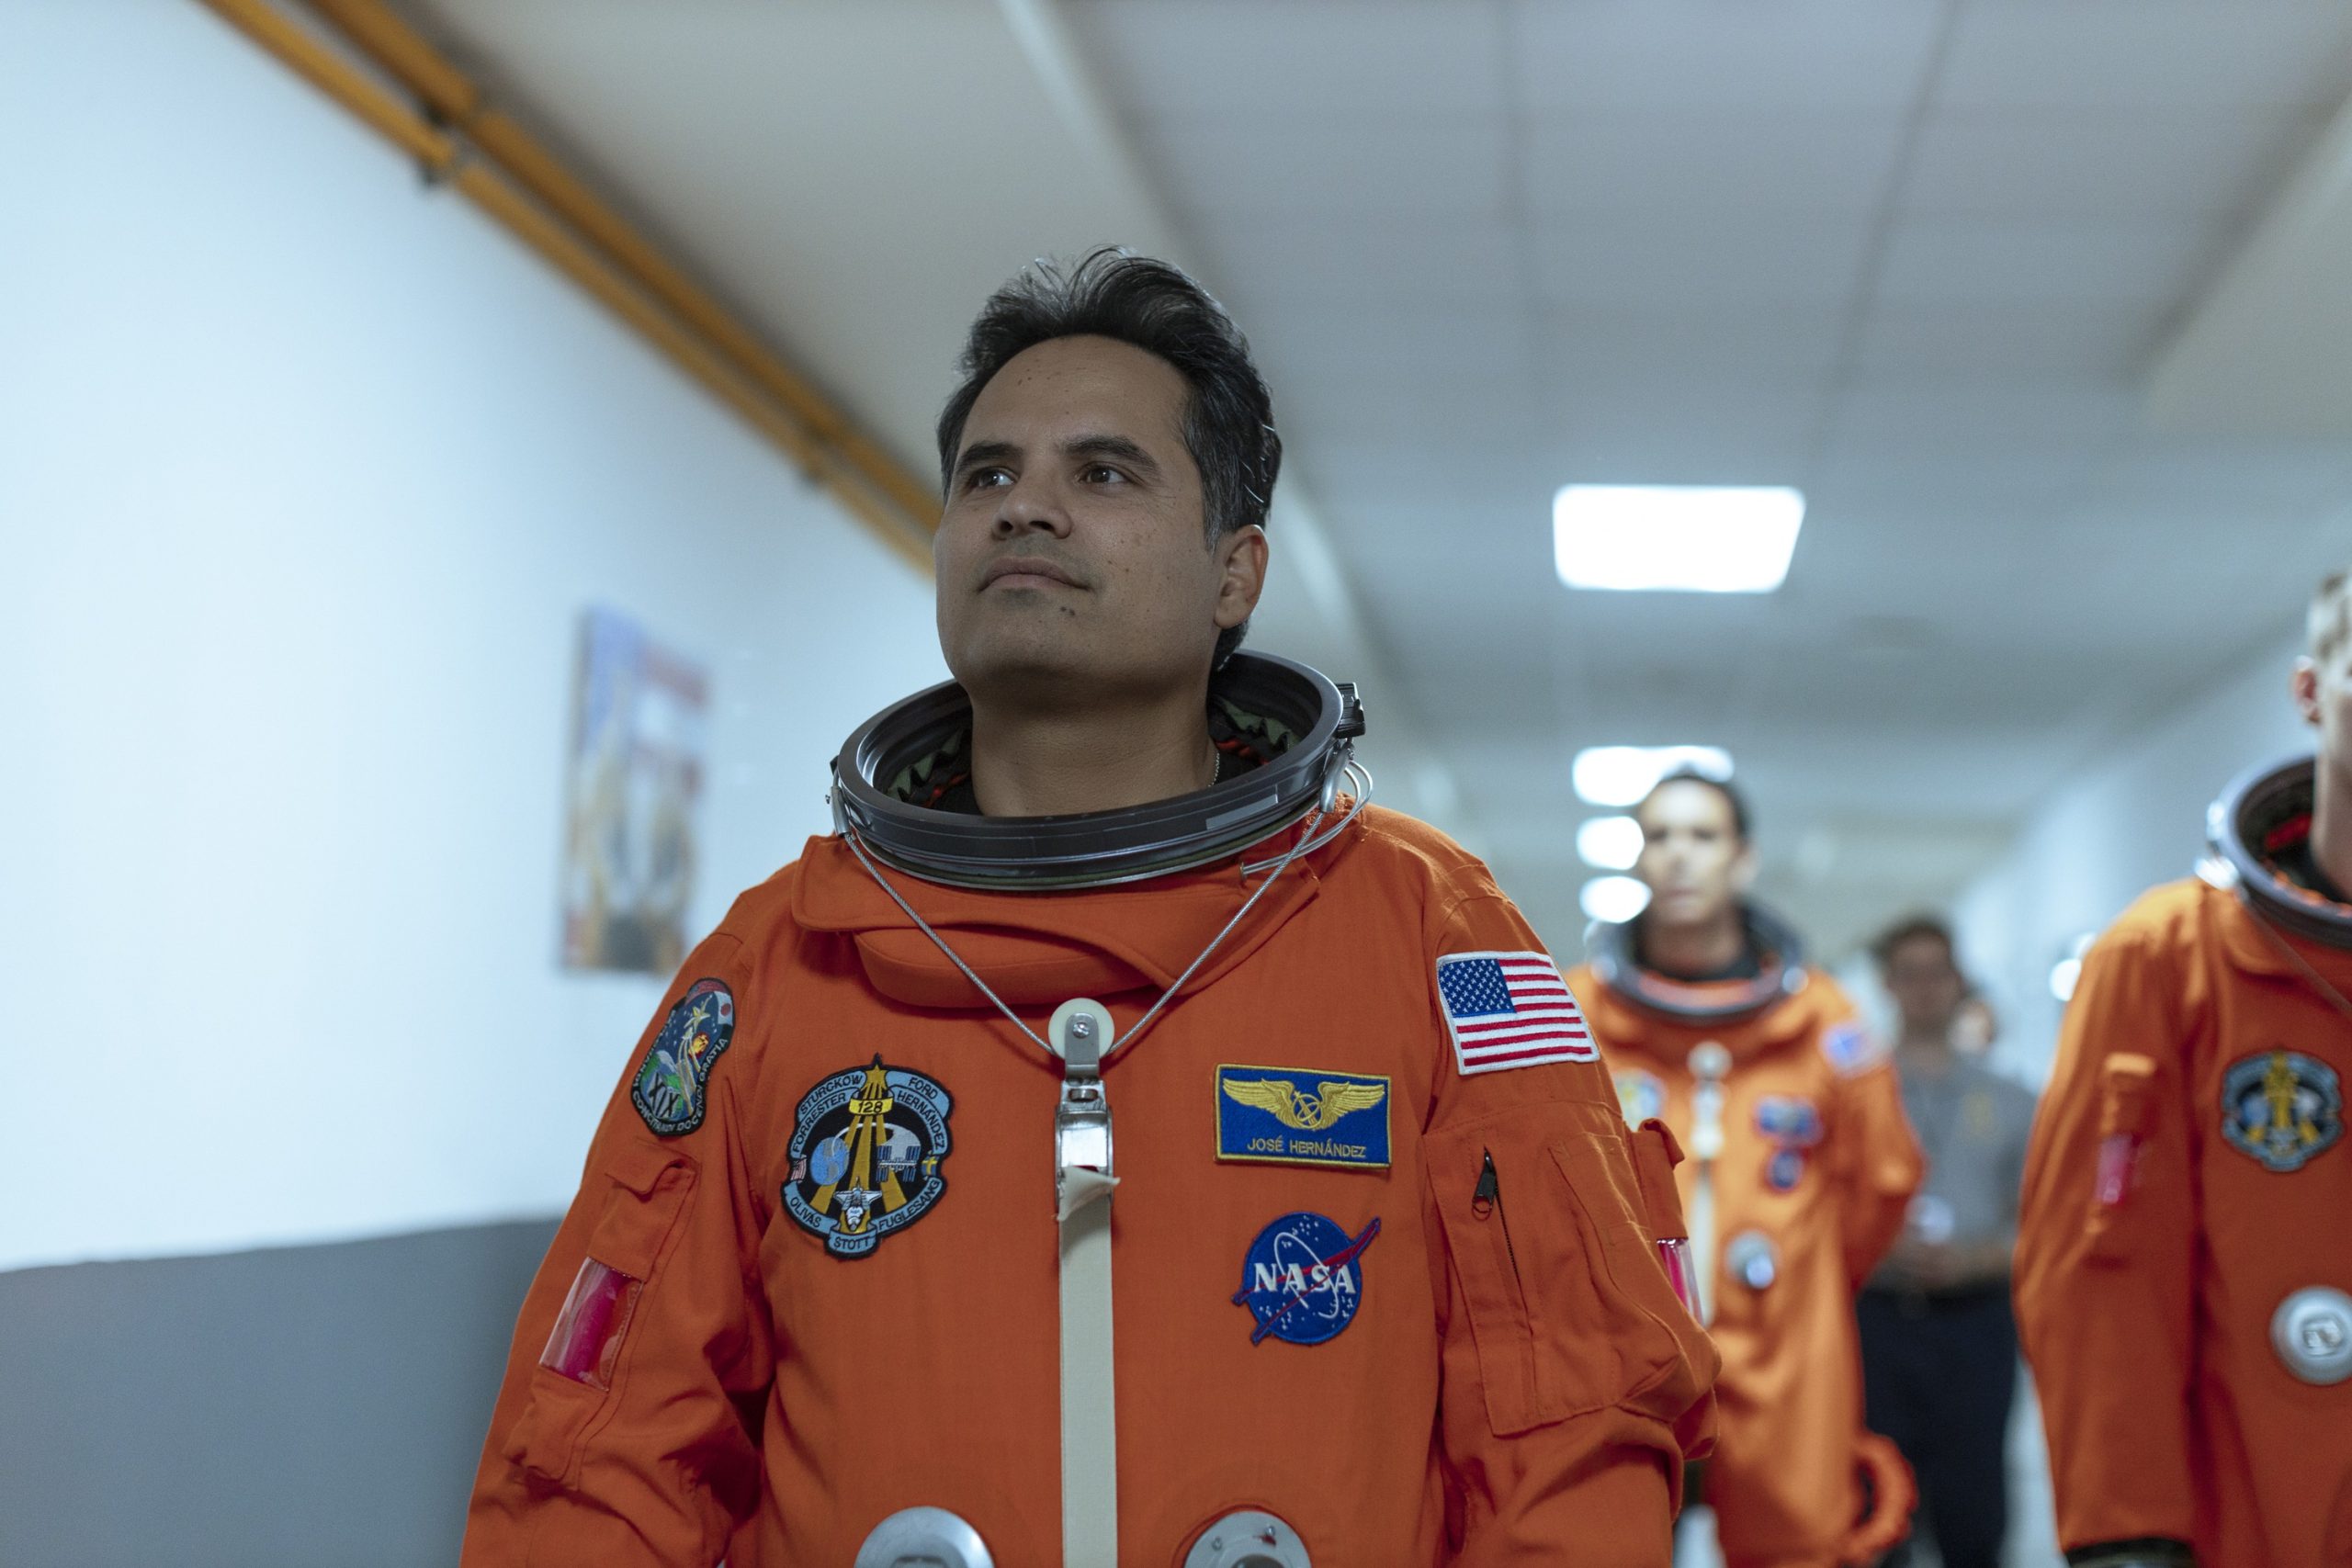 A Million Miles Away review – charming space biopic tells an inspiring story